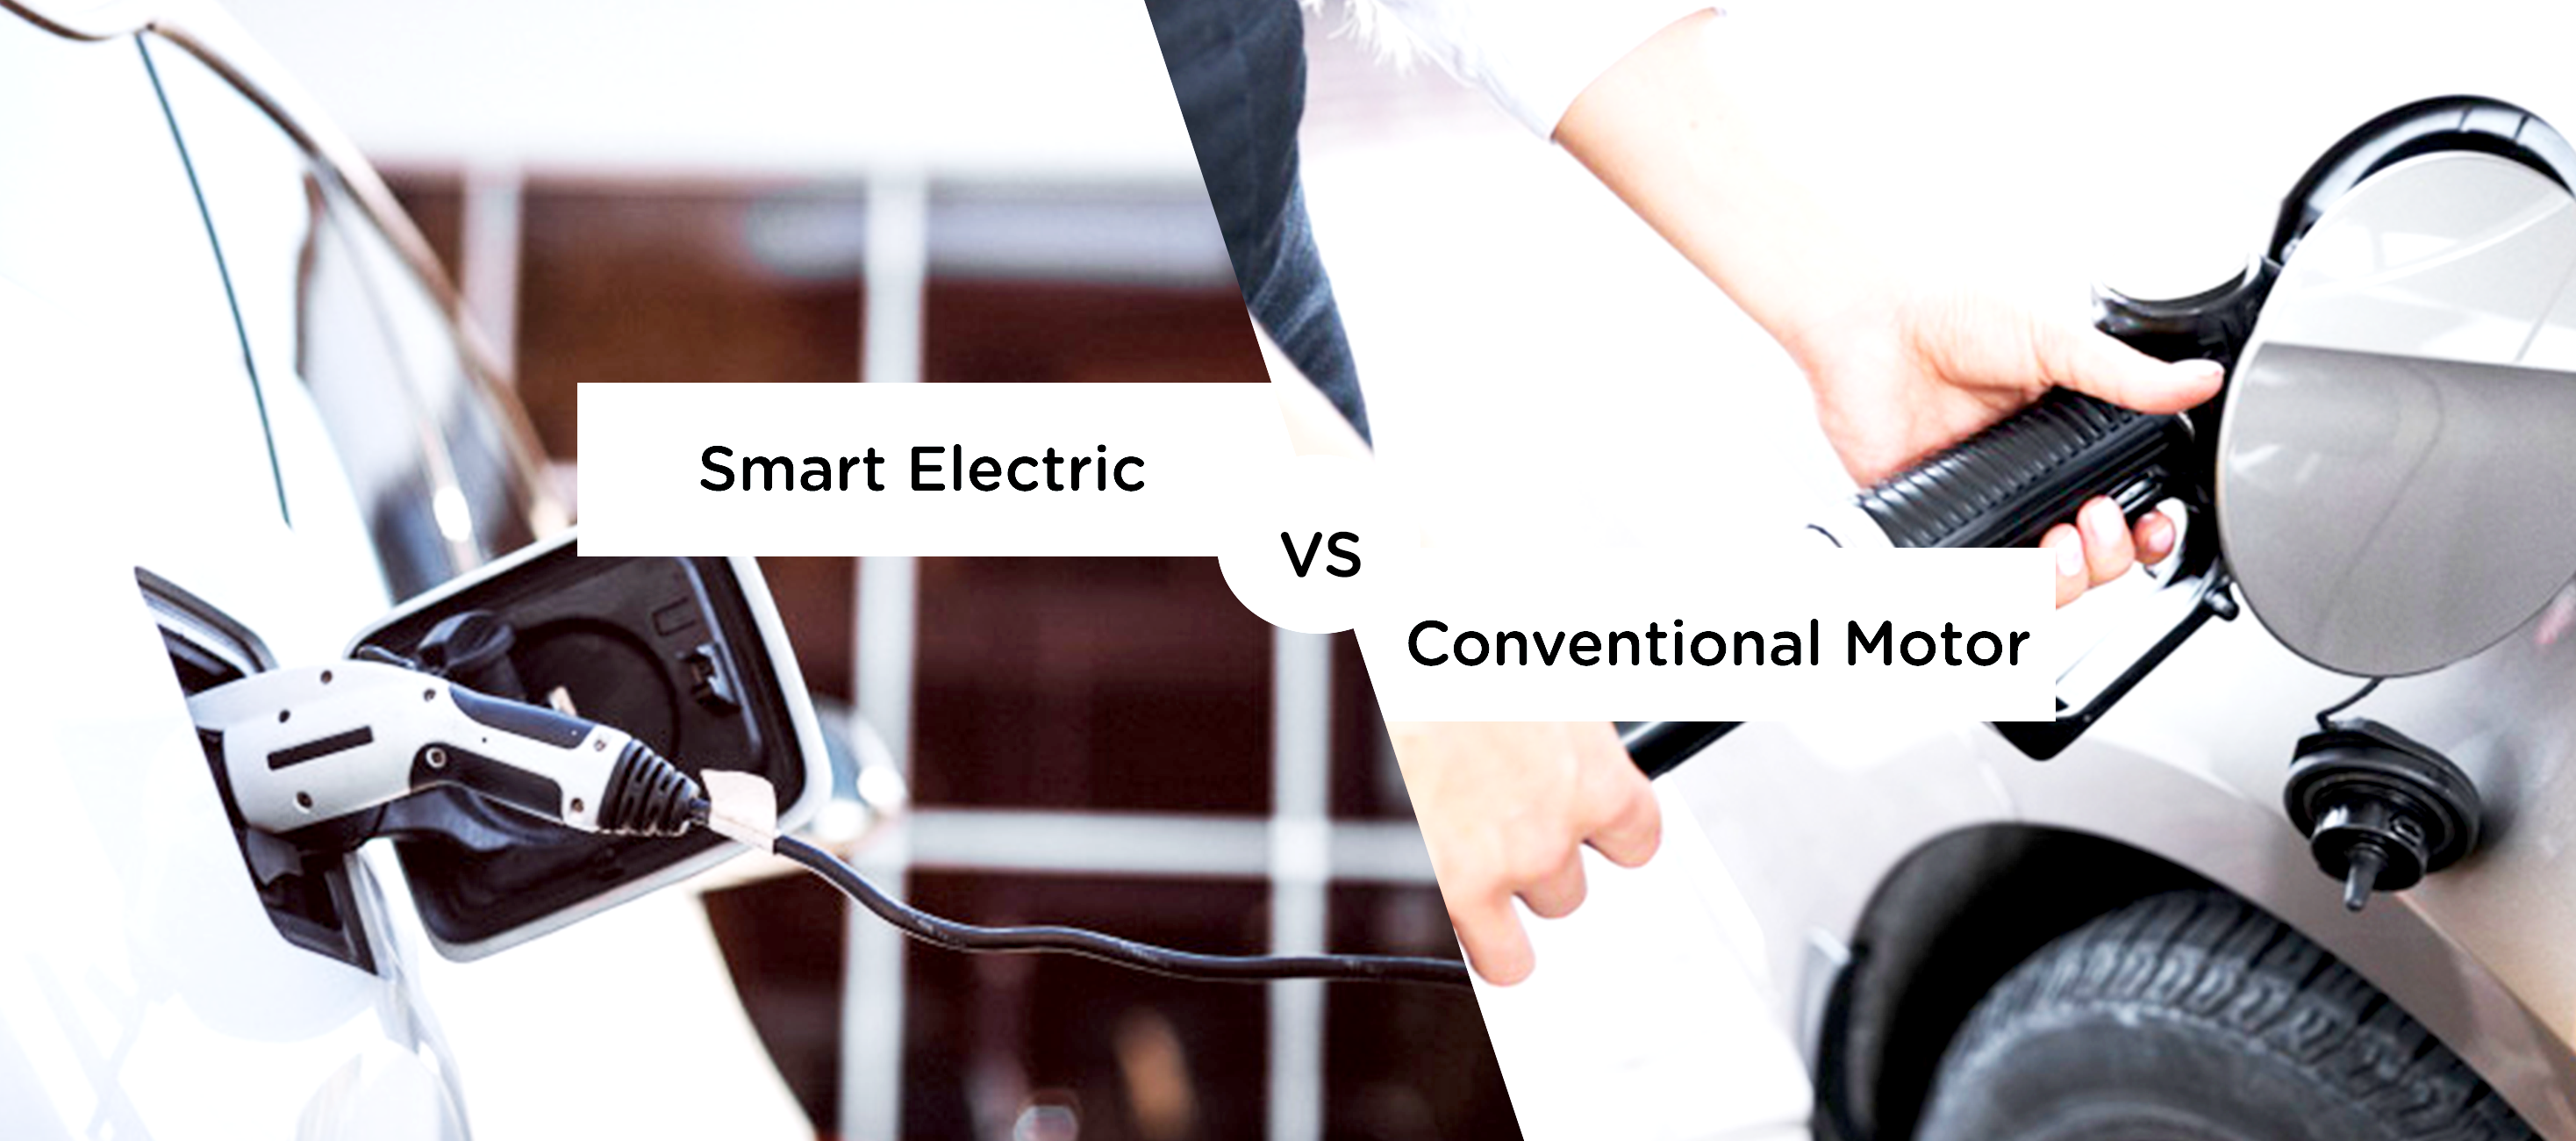 WHY SHOULD YOU OPT FOR SMART ELECTRIC VEHICLES OVER CONVENTIONAL VEHICLES?